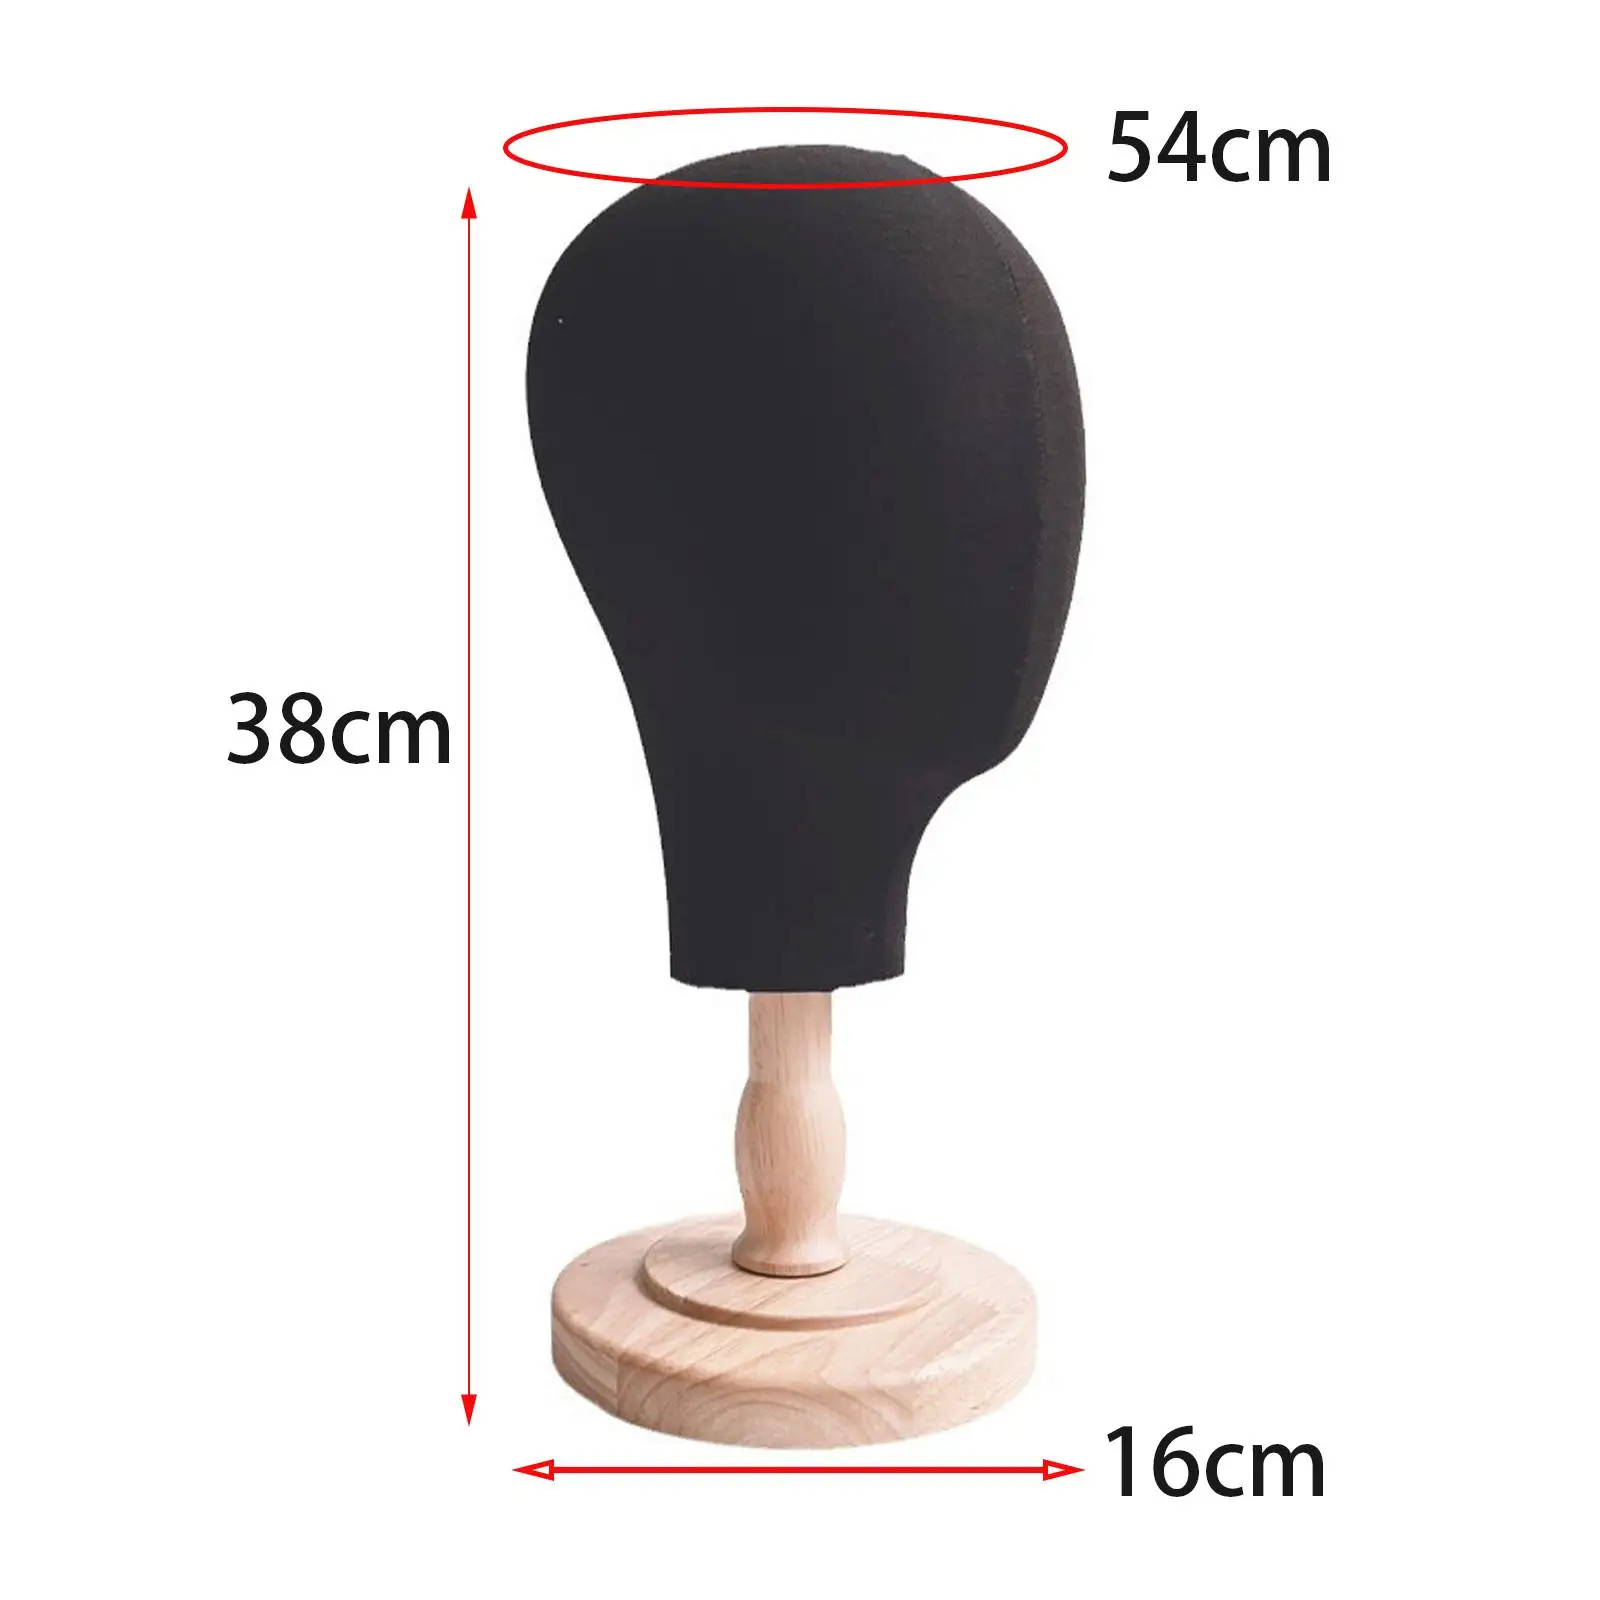 Manikin Head Insertable Pins Sturdy Hats Wig Display Stand with Wood Base Wig Head Model for Hat Jewelry Scarves Glasses Headset